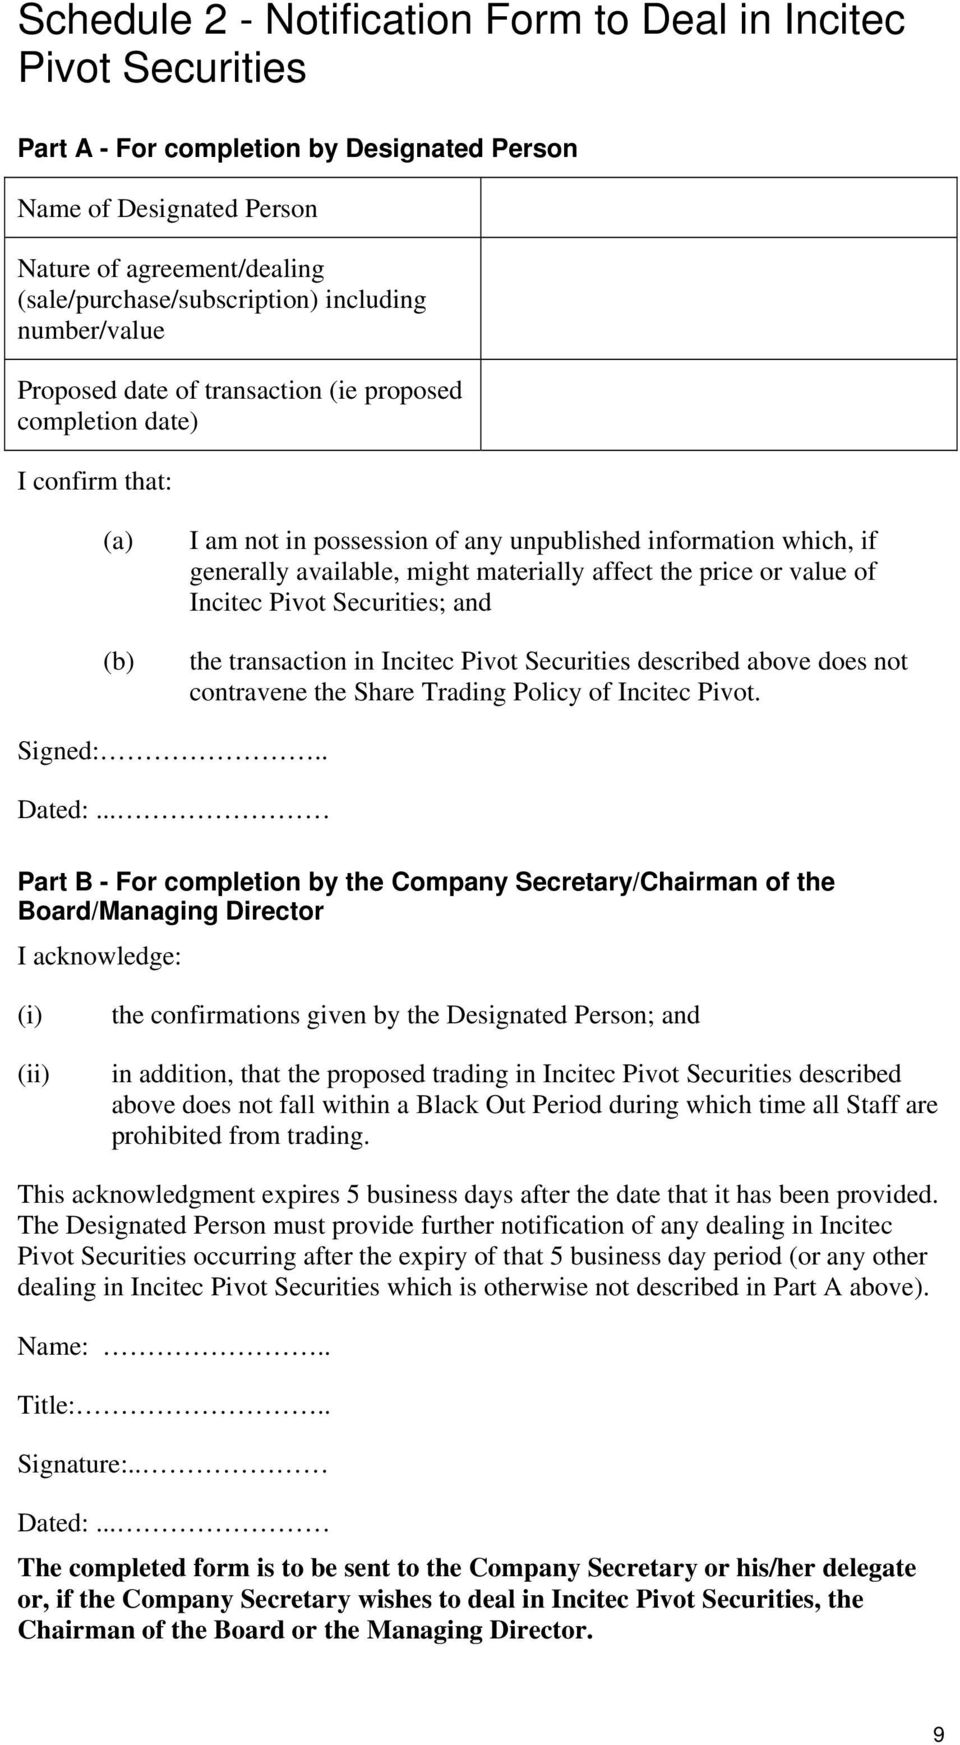 affect the price or value of Incitec Pivot Securities; and the transaction in Incitec Pivot Securities described above does not contravene the Share Trading Policy of Incitec Pivot. Signed:.. Dated:.